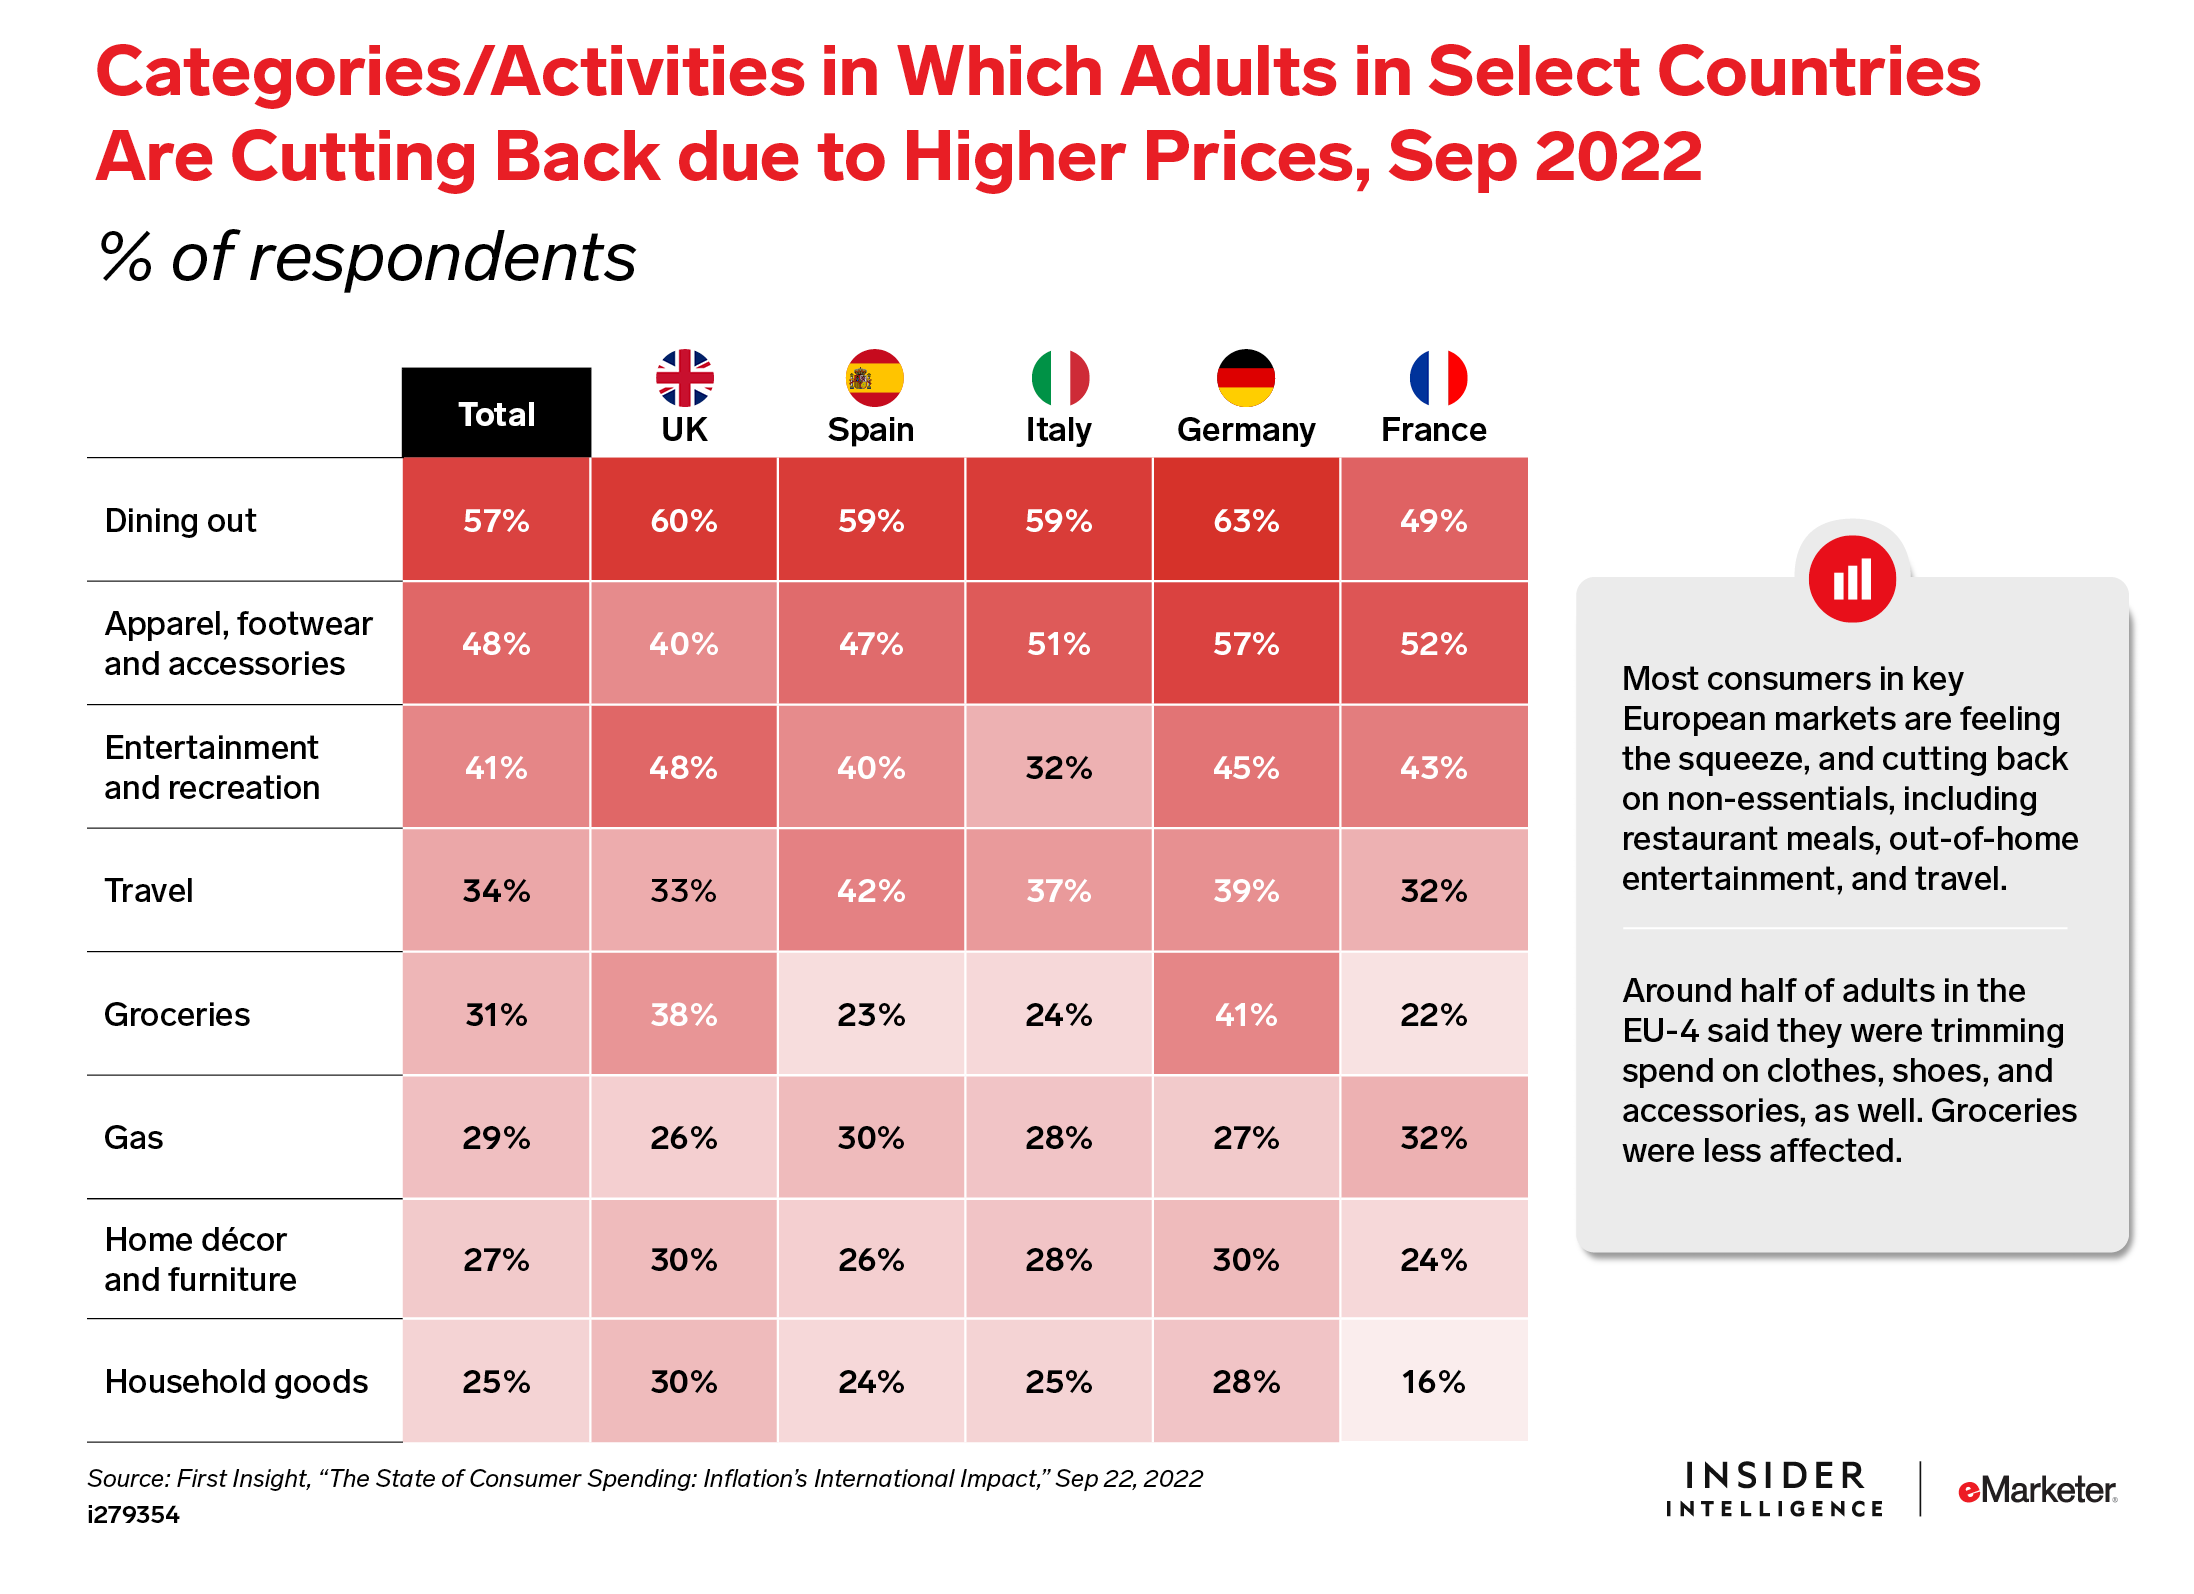 Categories/Activities in Which Adults in Select Countries Are Cutting Back due to Higher Prices, Sep 2022 (% of respondents)